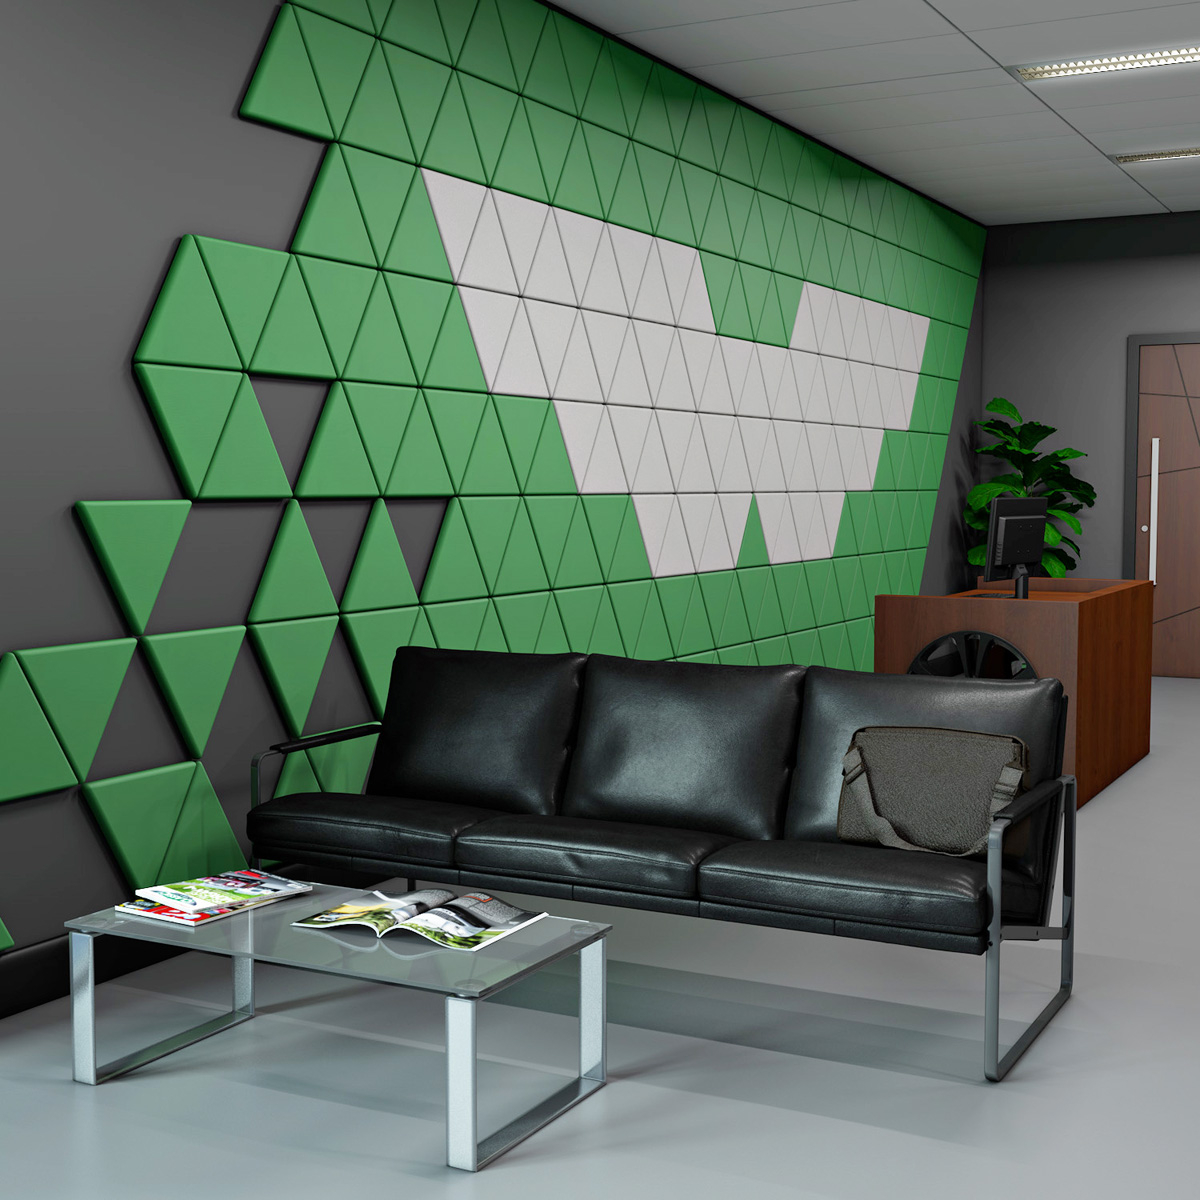 VIRAGE™ Triangular Acoustic Wall Soundproofing Panels